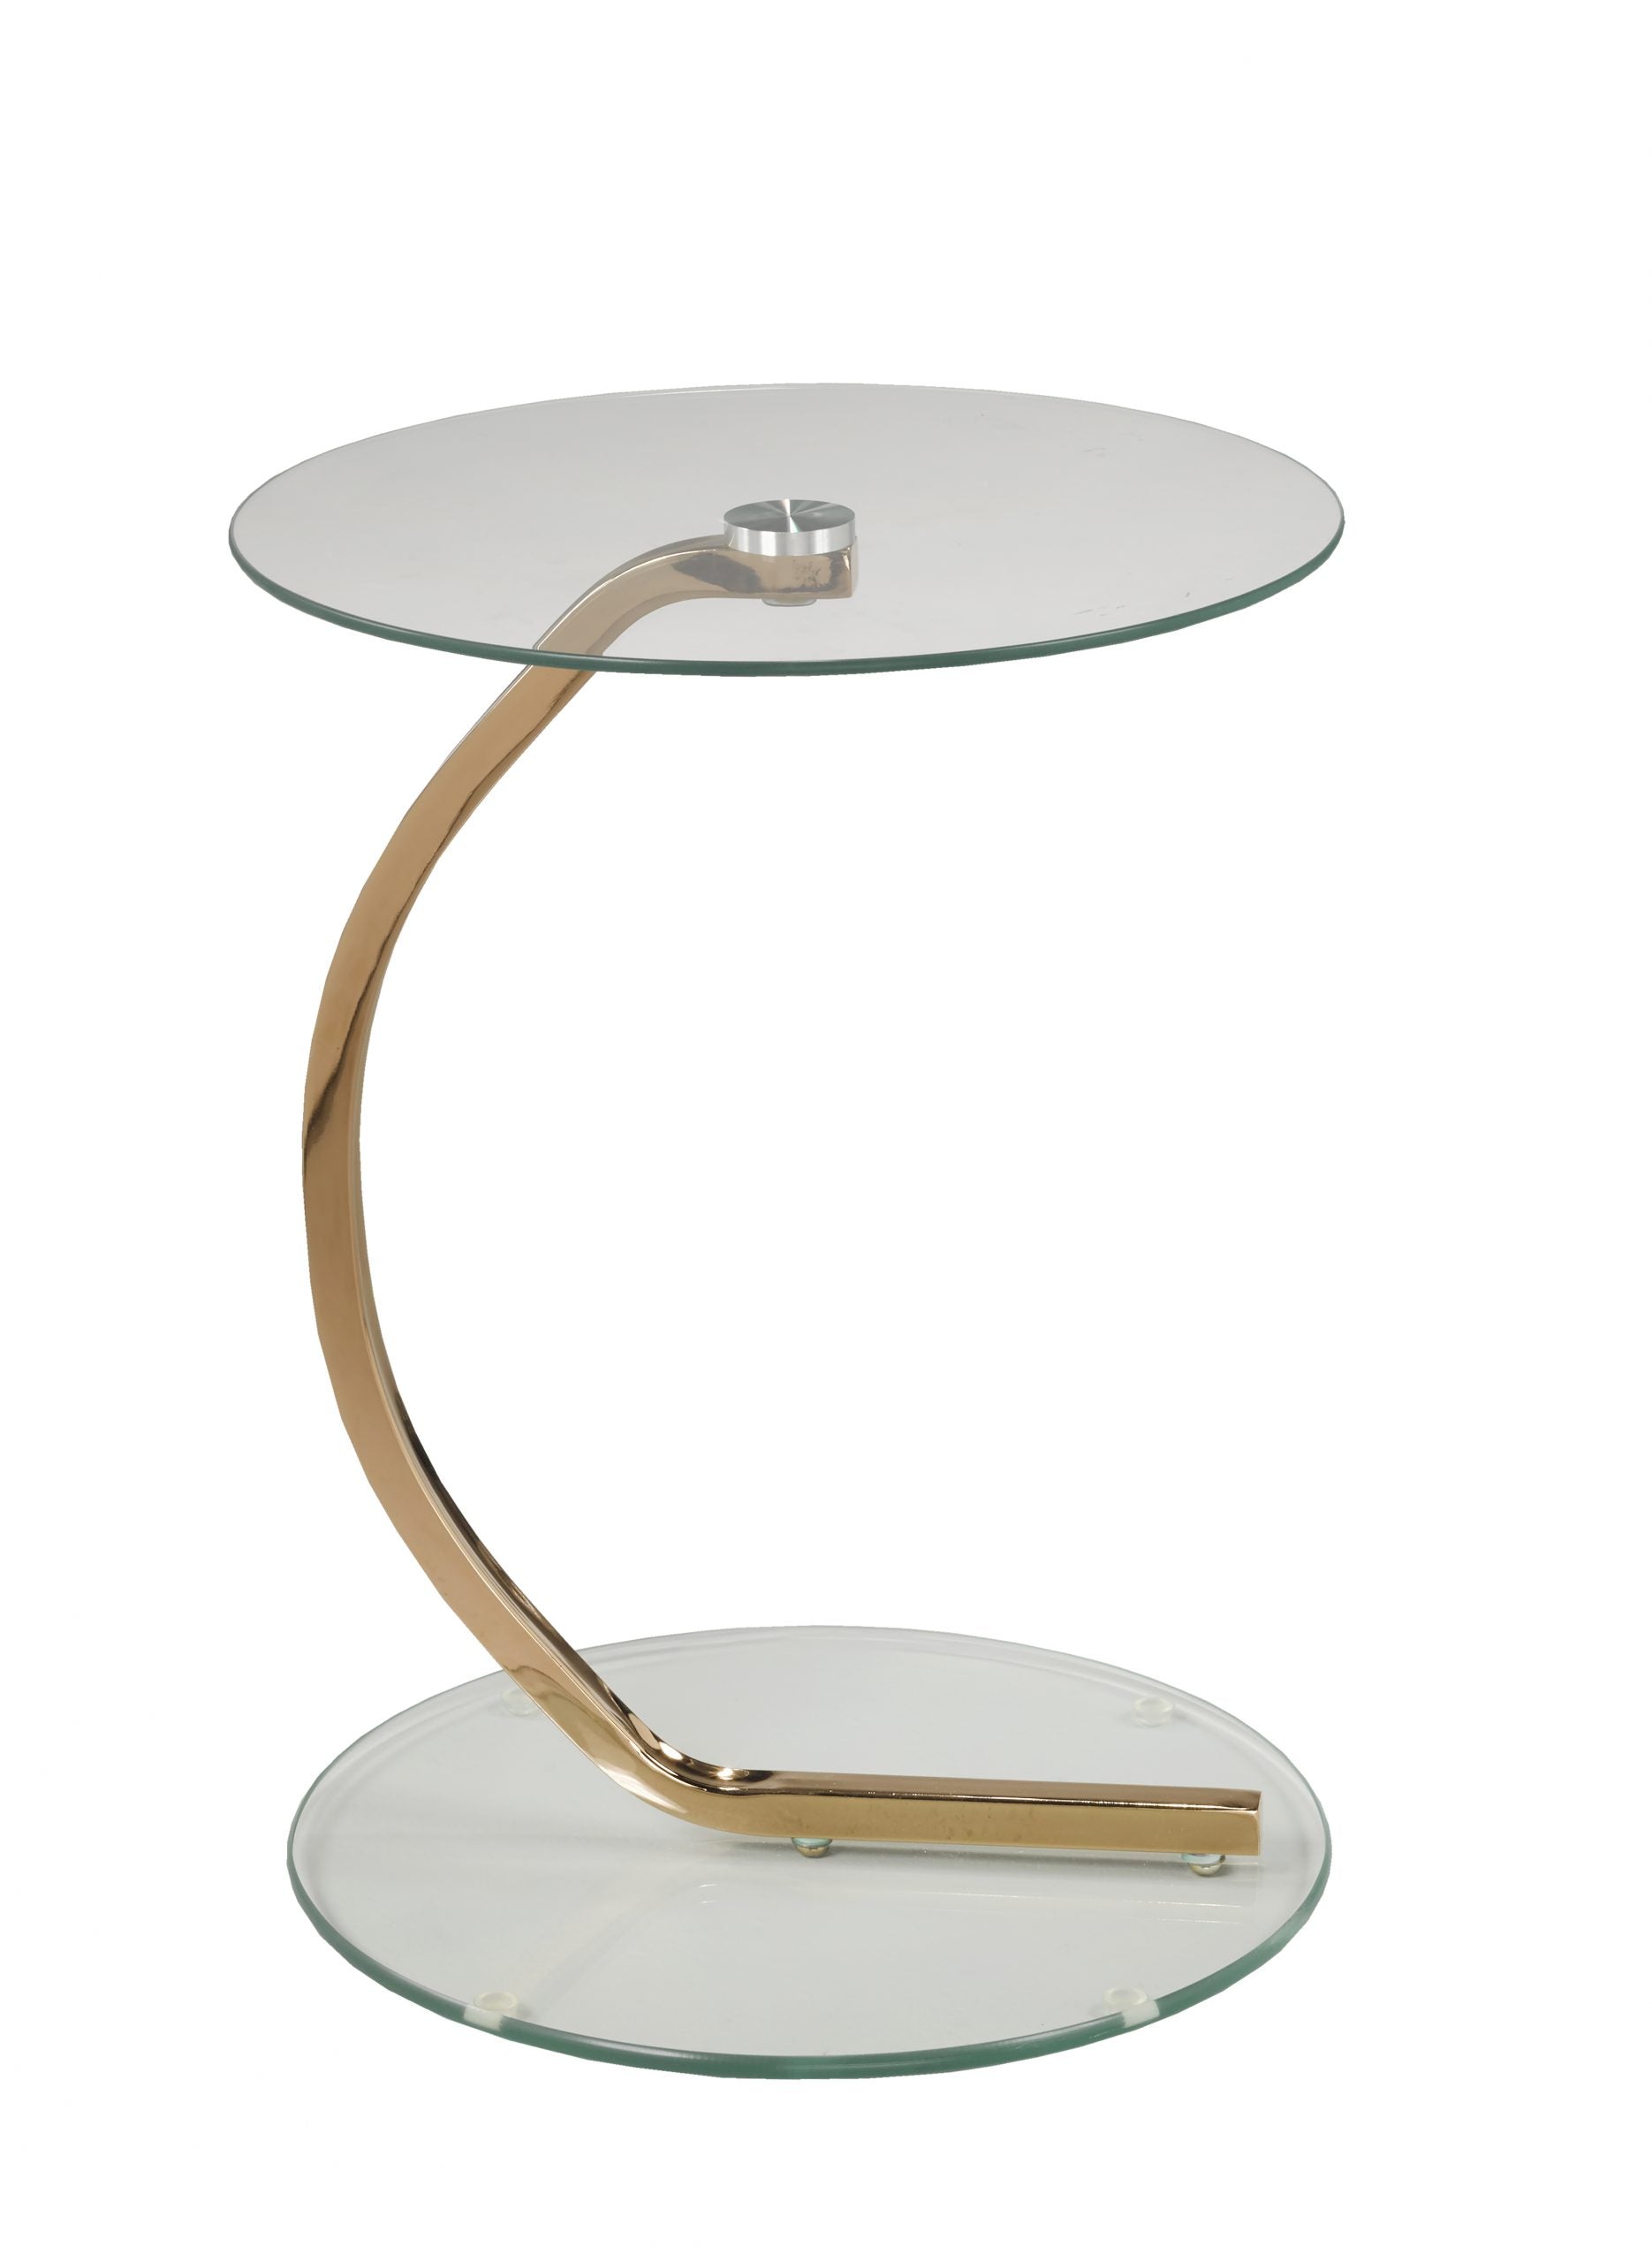 ROSE GOLD ACCENT TABLE - 105-60